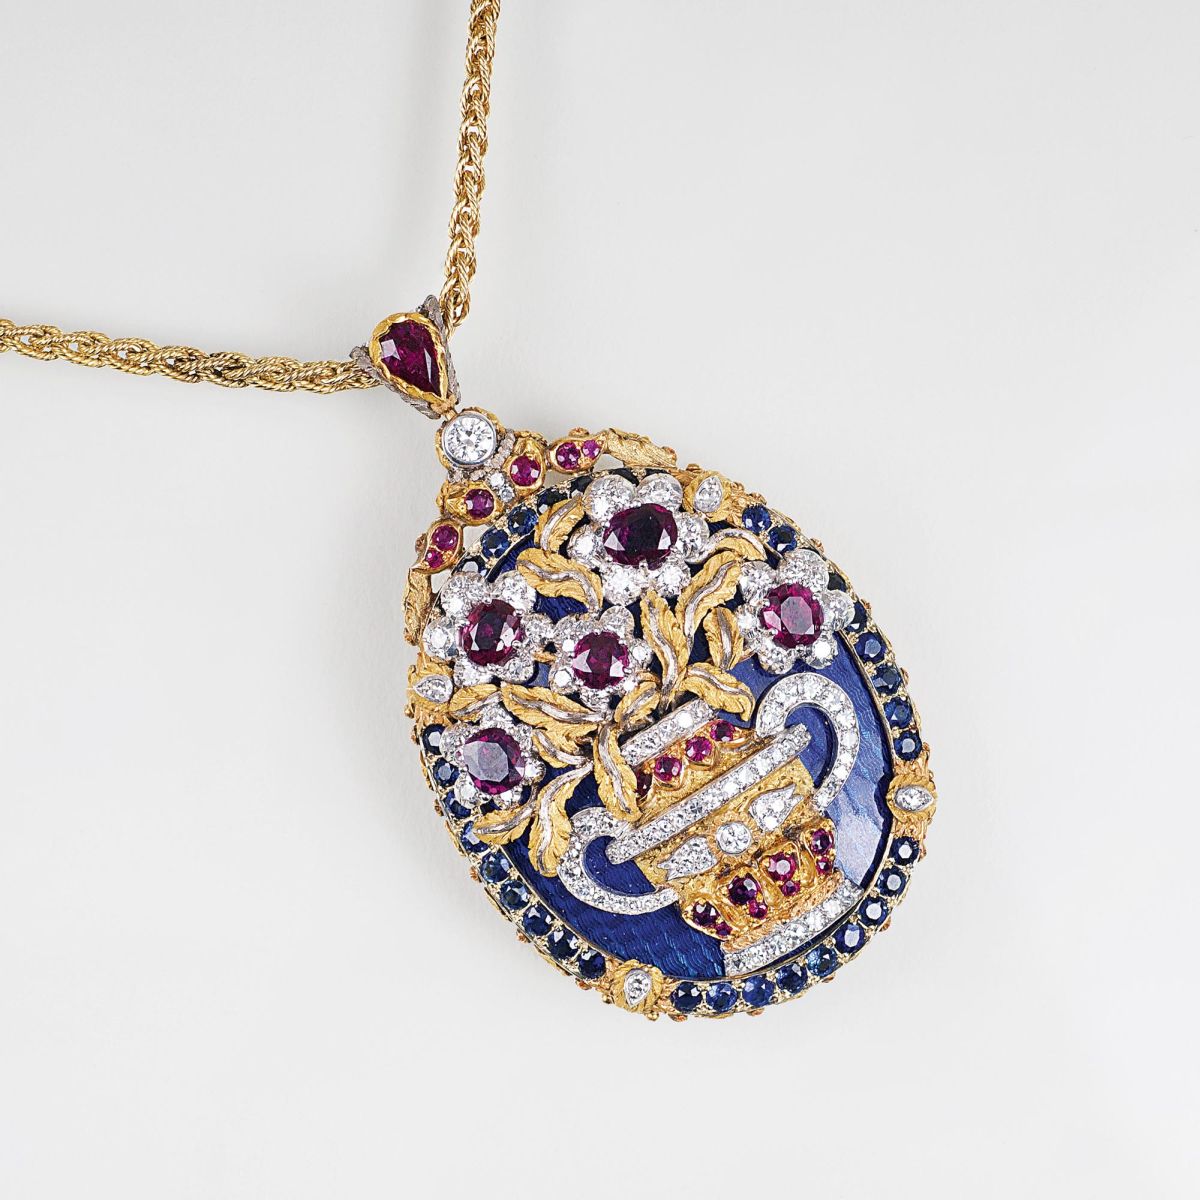 An extraordinary Vintage Pendant with Rubies, Sapphires and Diamonds